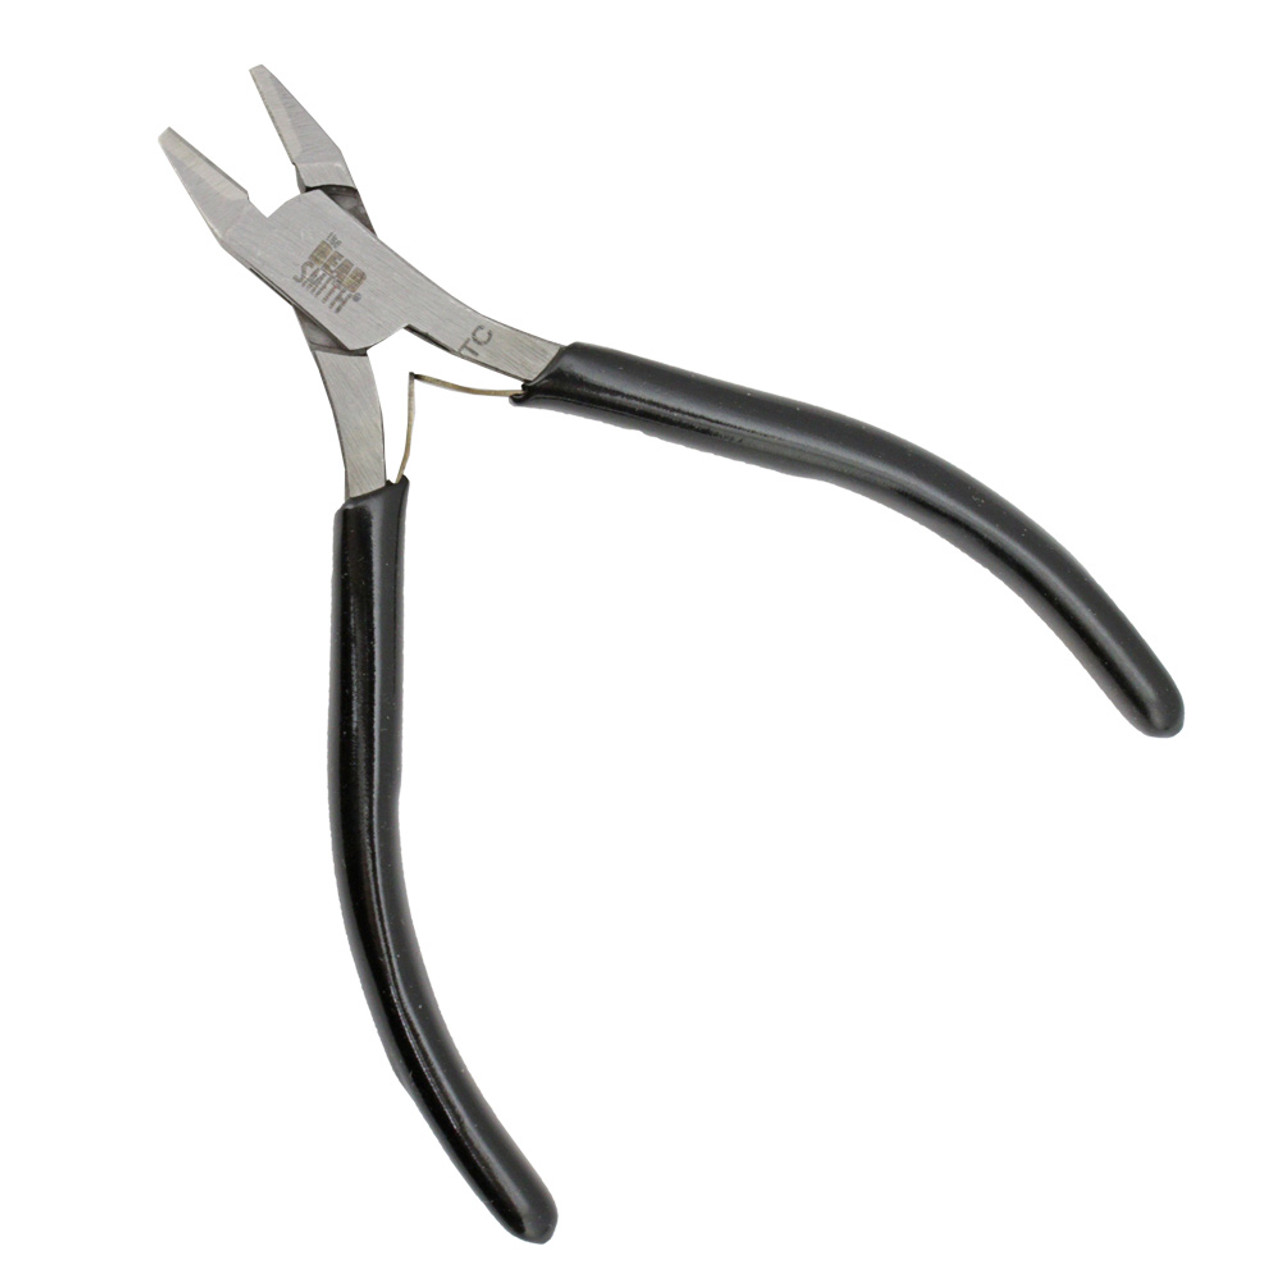 Side Cutters for DIY Jewelry Making, Wire Wrapping, Wire Cutting